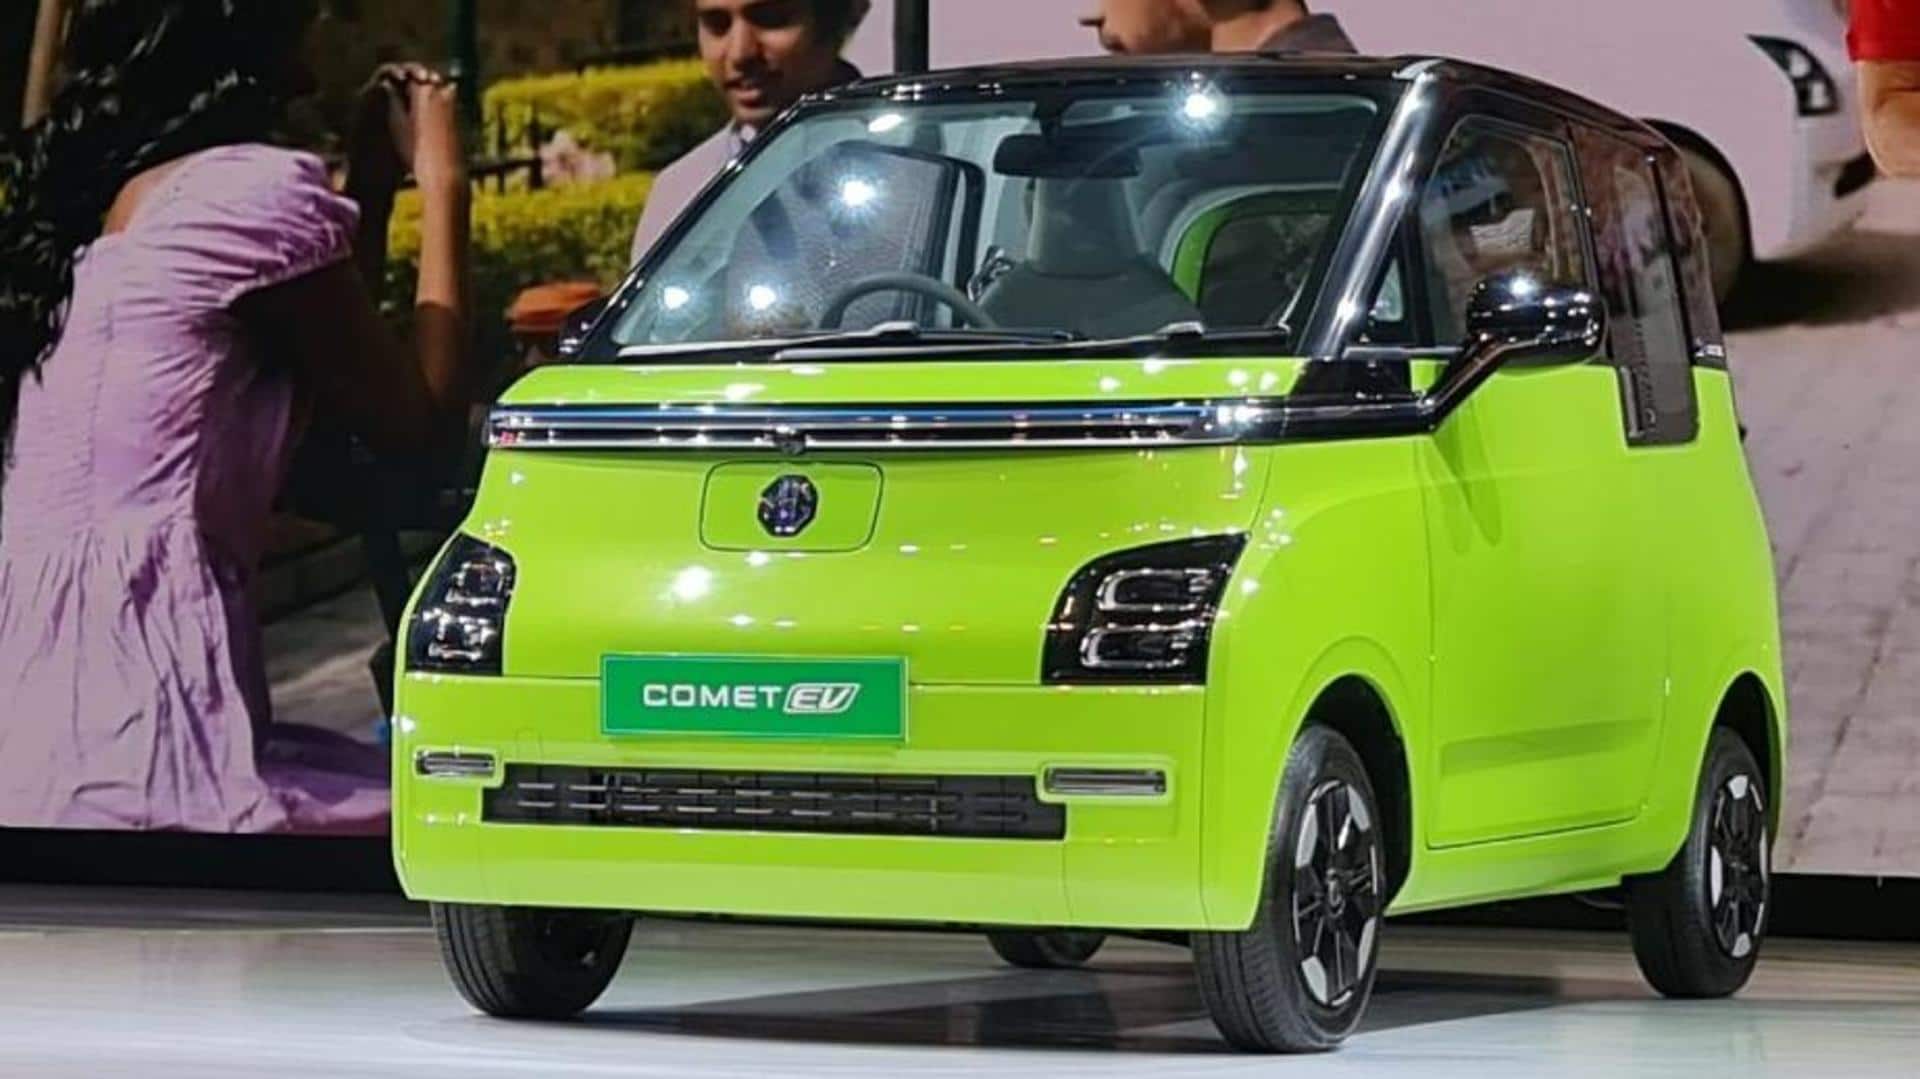 MG Comet EV goes official in India: Check features